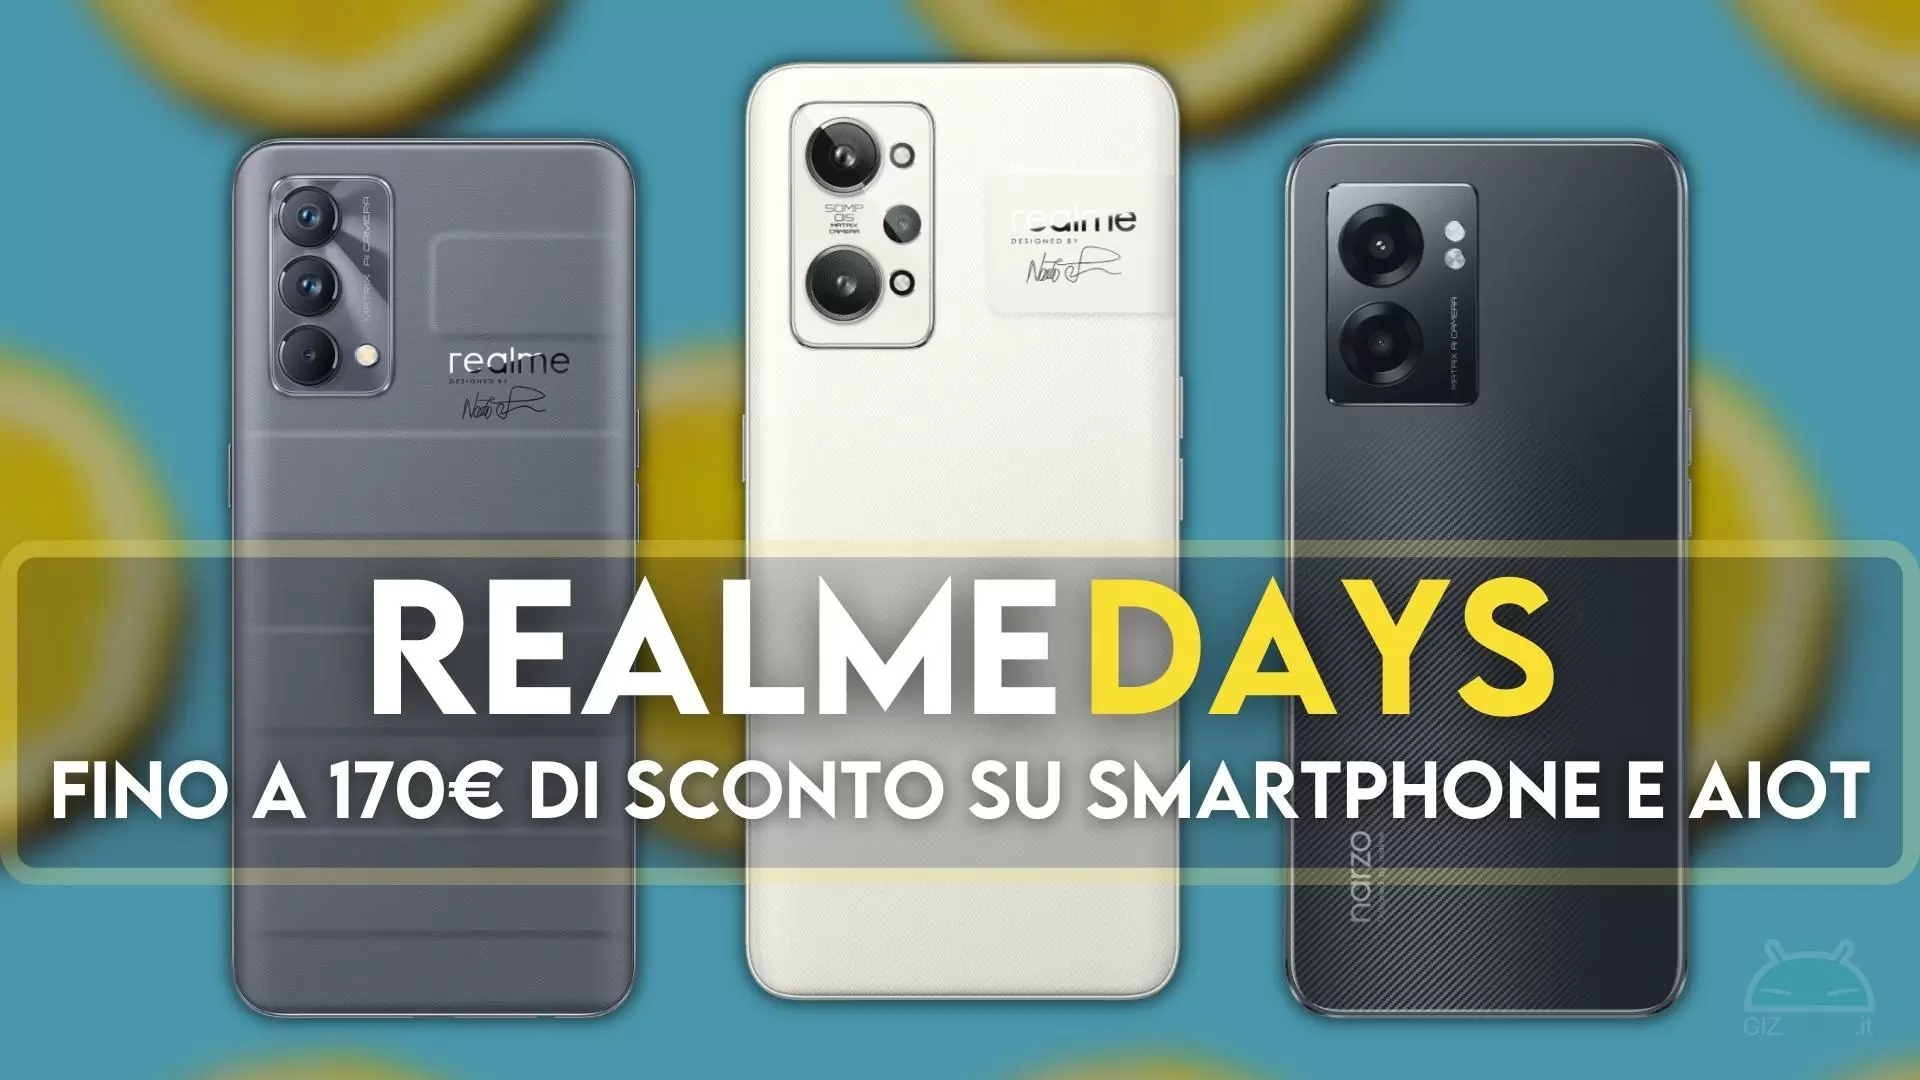 realme Days: products on offer until July 31st